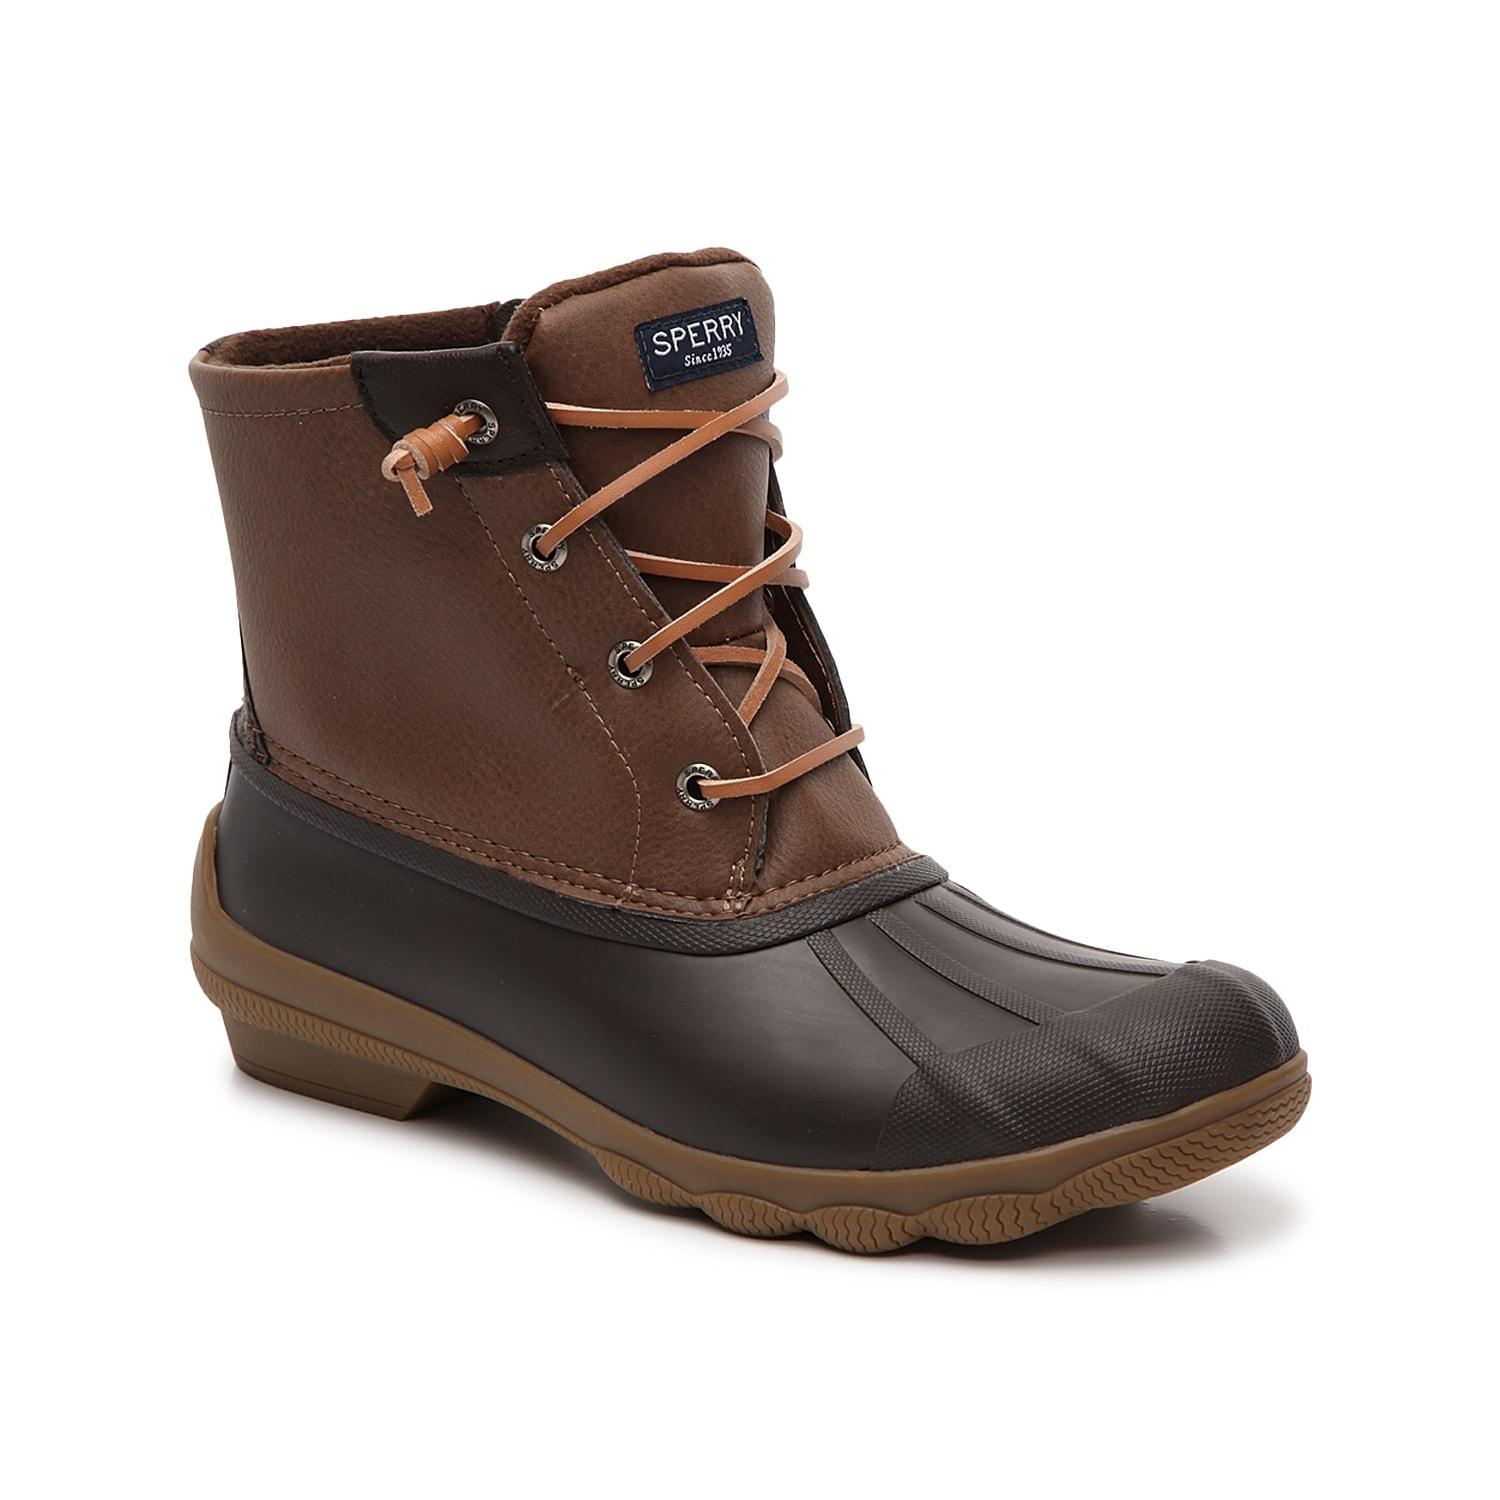 Sperry Syren Gulf Duck Boots Product Image